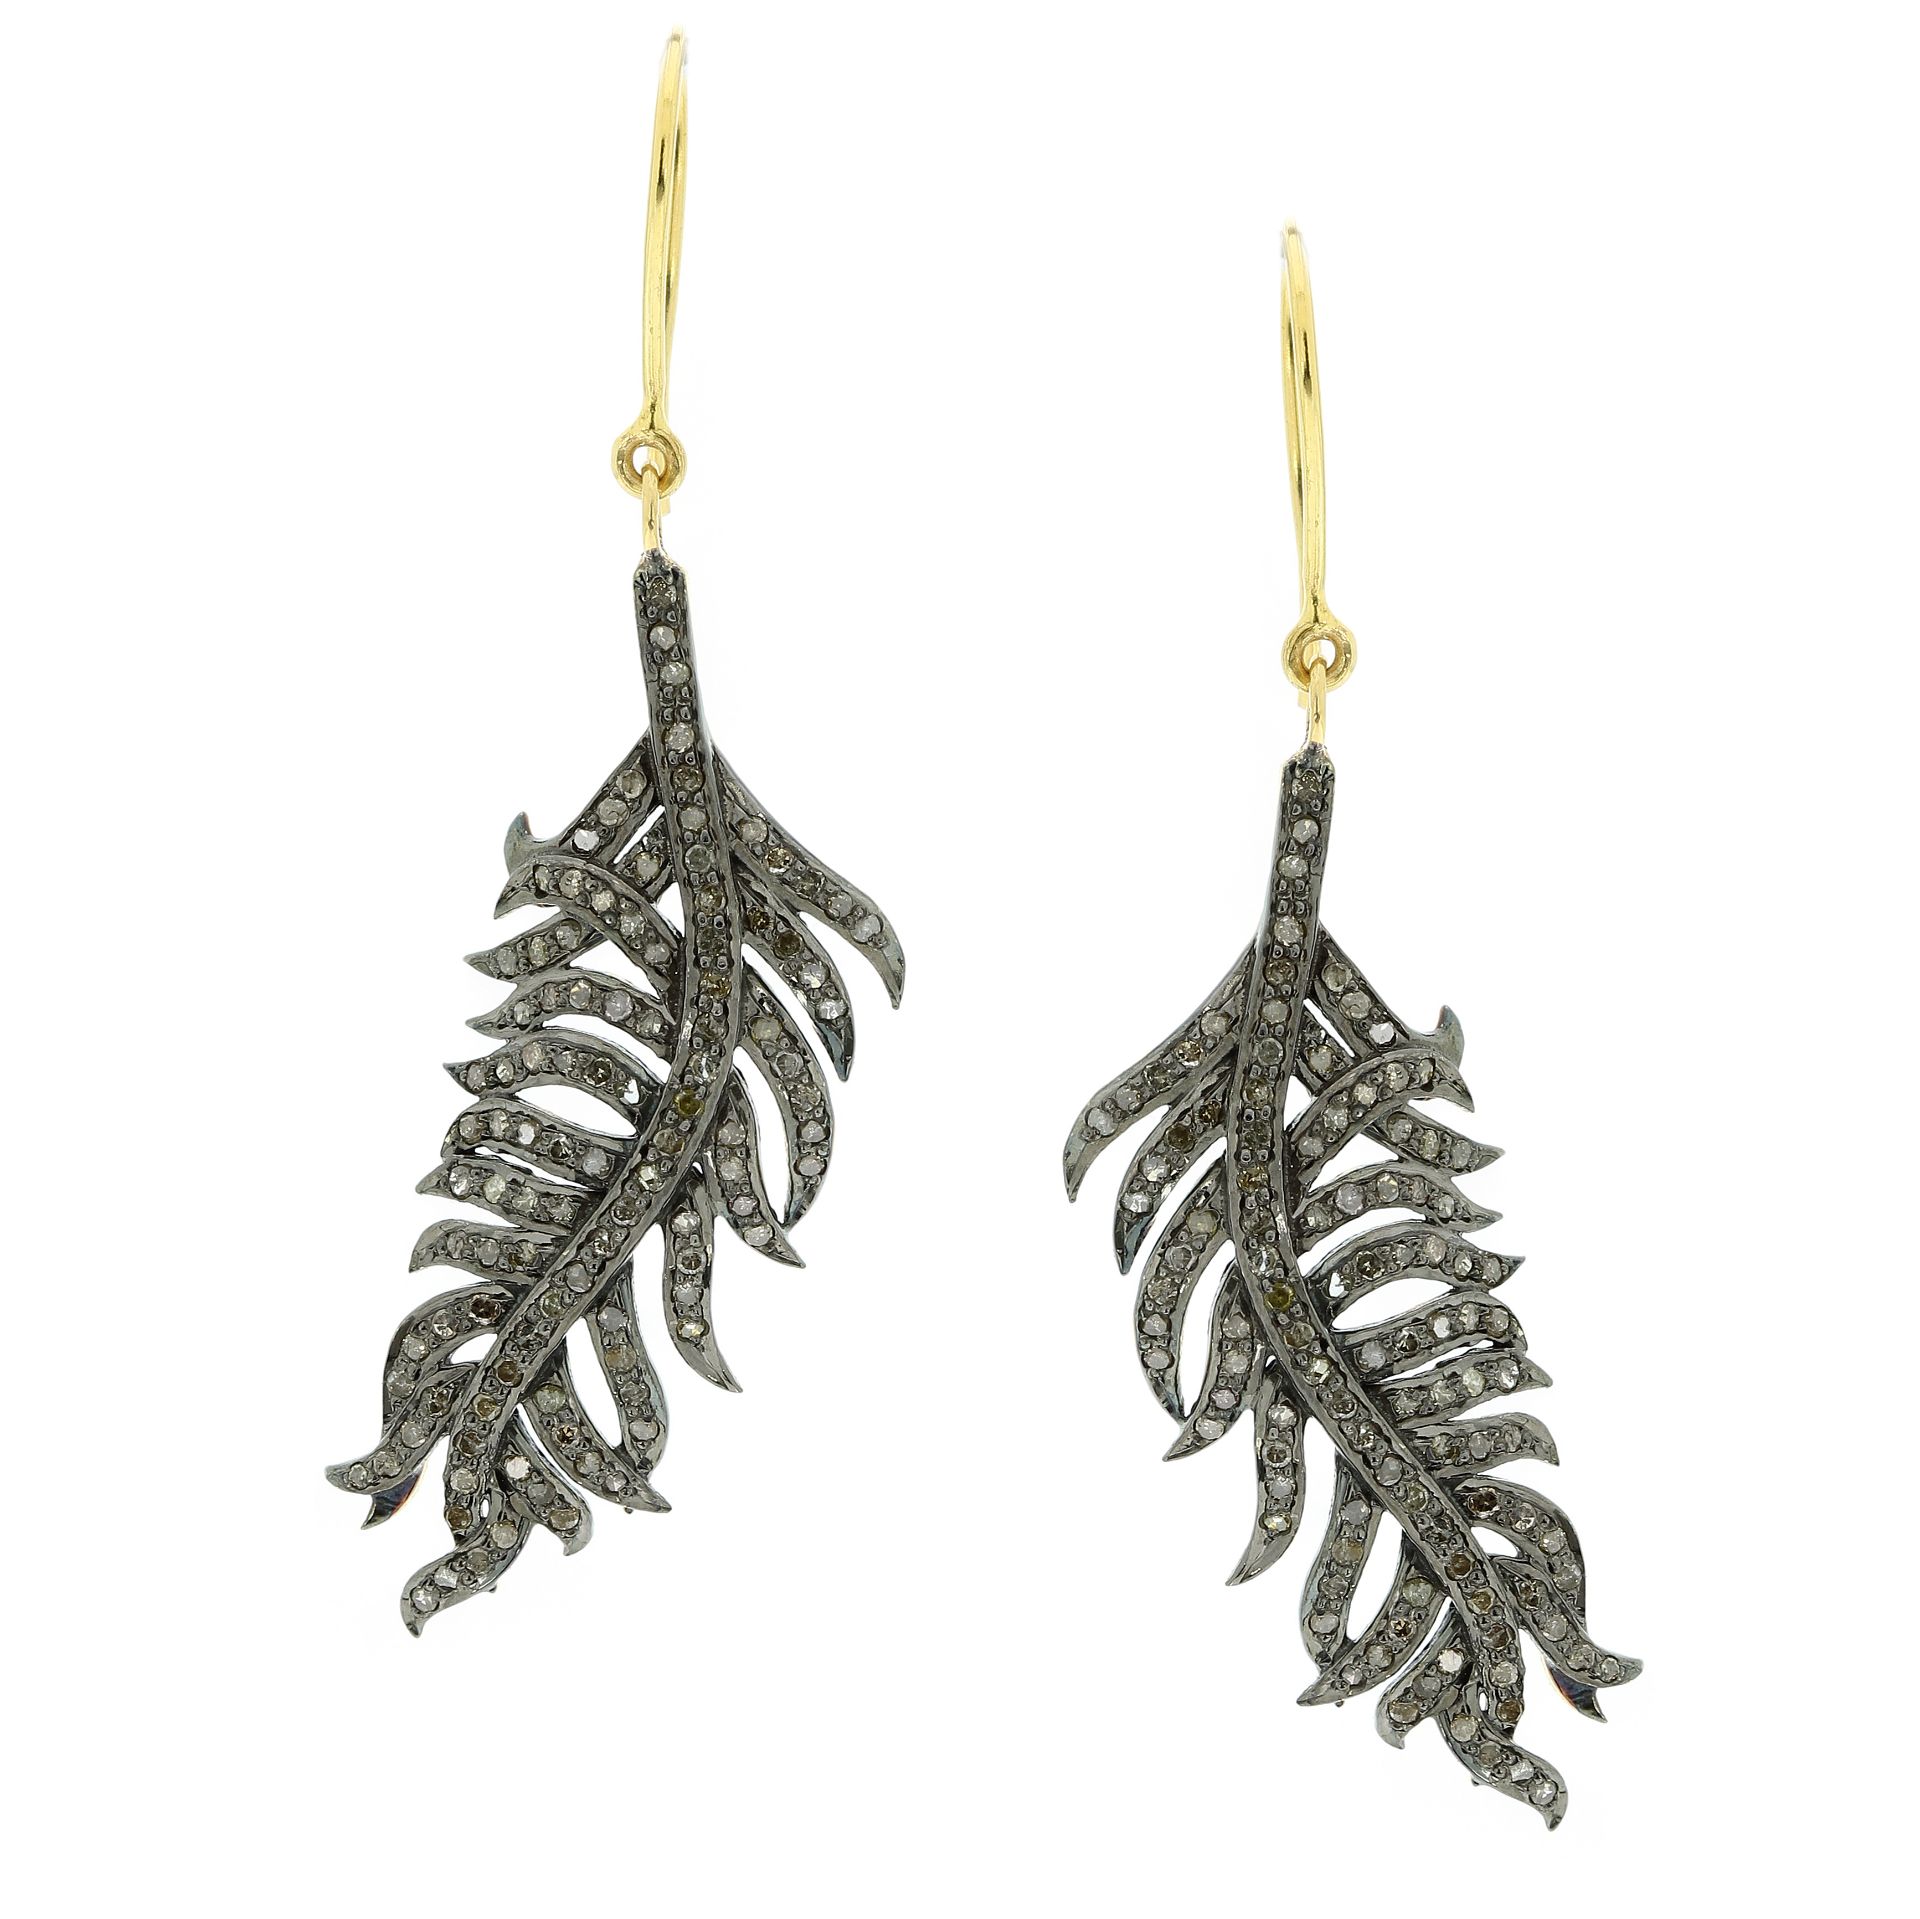 A PAIR OF DIAMOND FEATHER EARRINGS in yellow gold and silver, each designed as a feather, jewelled